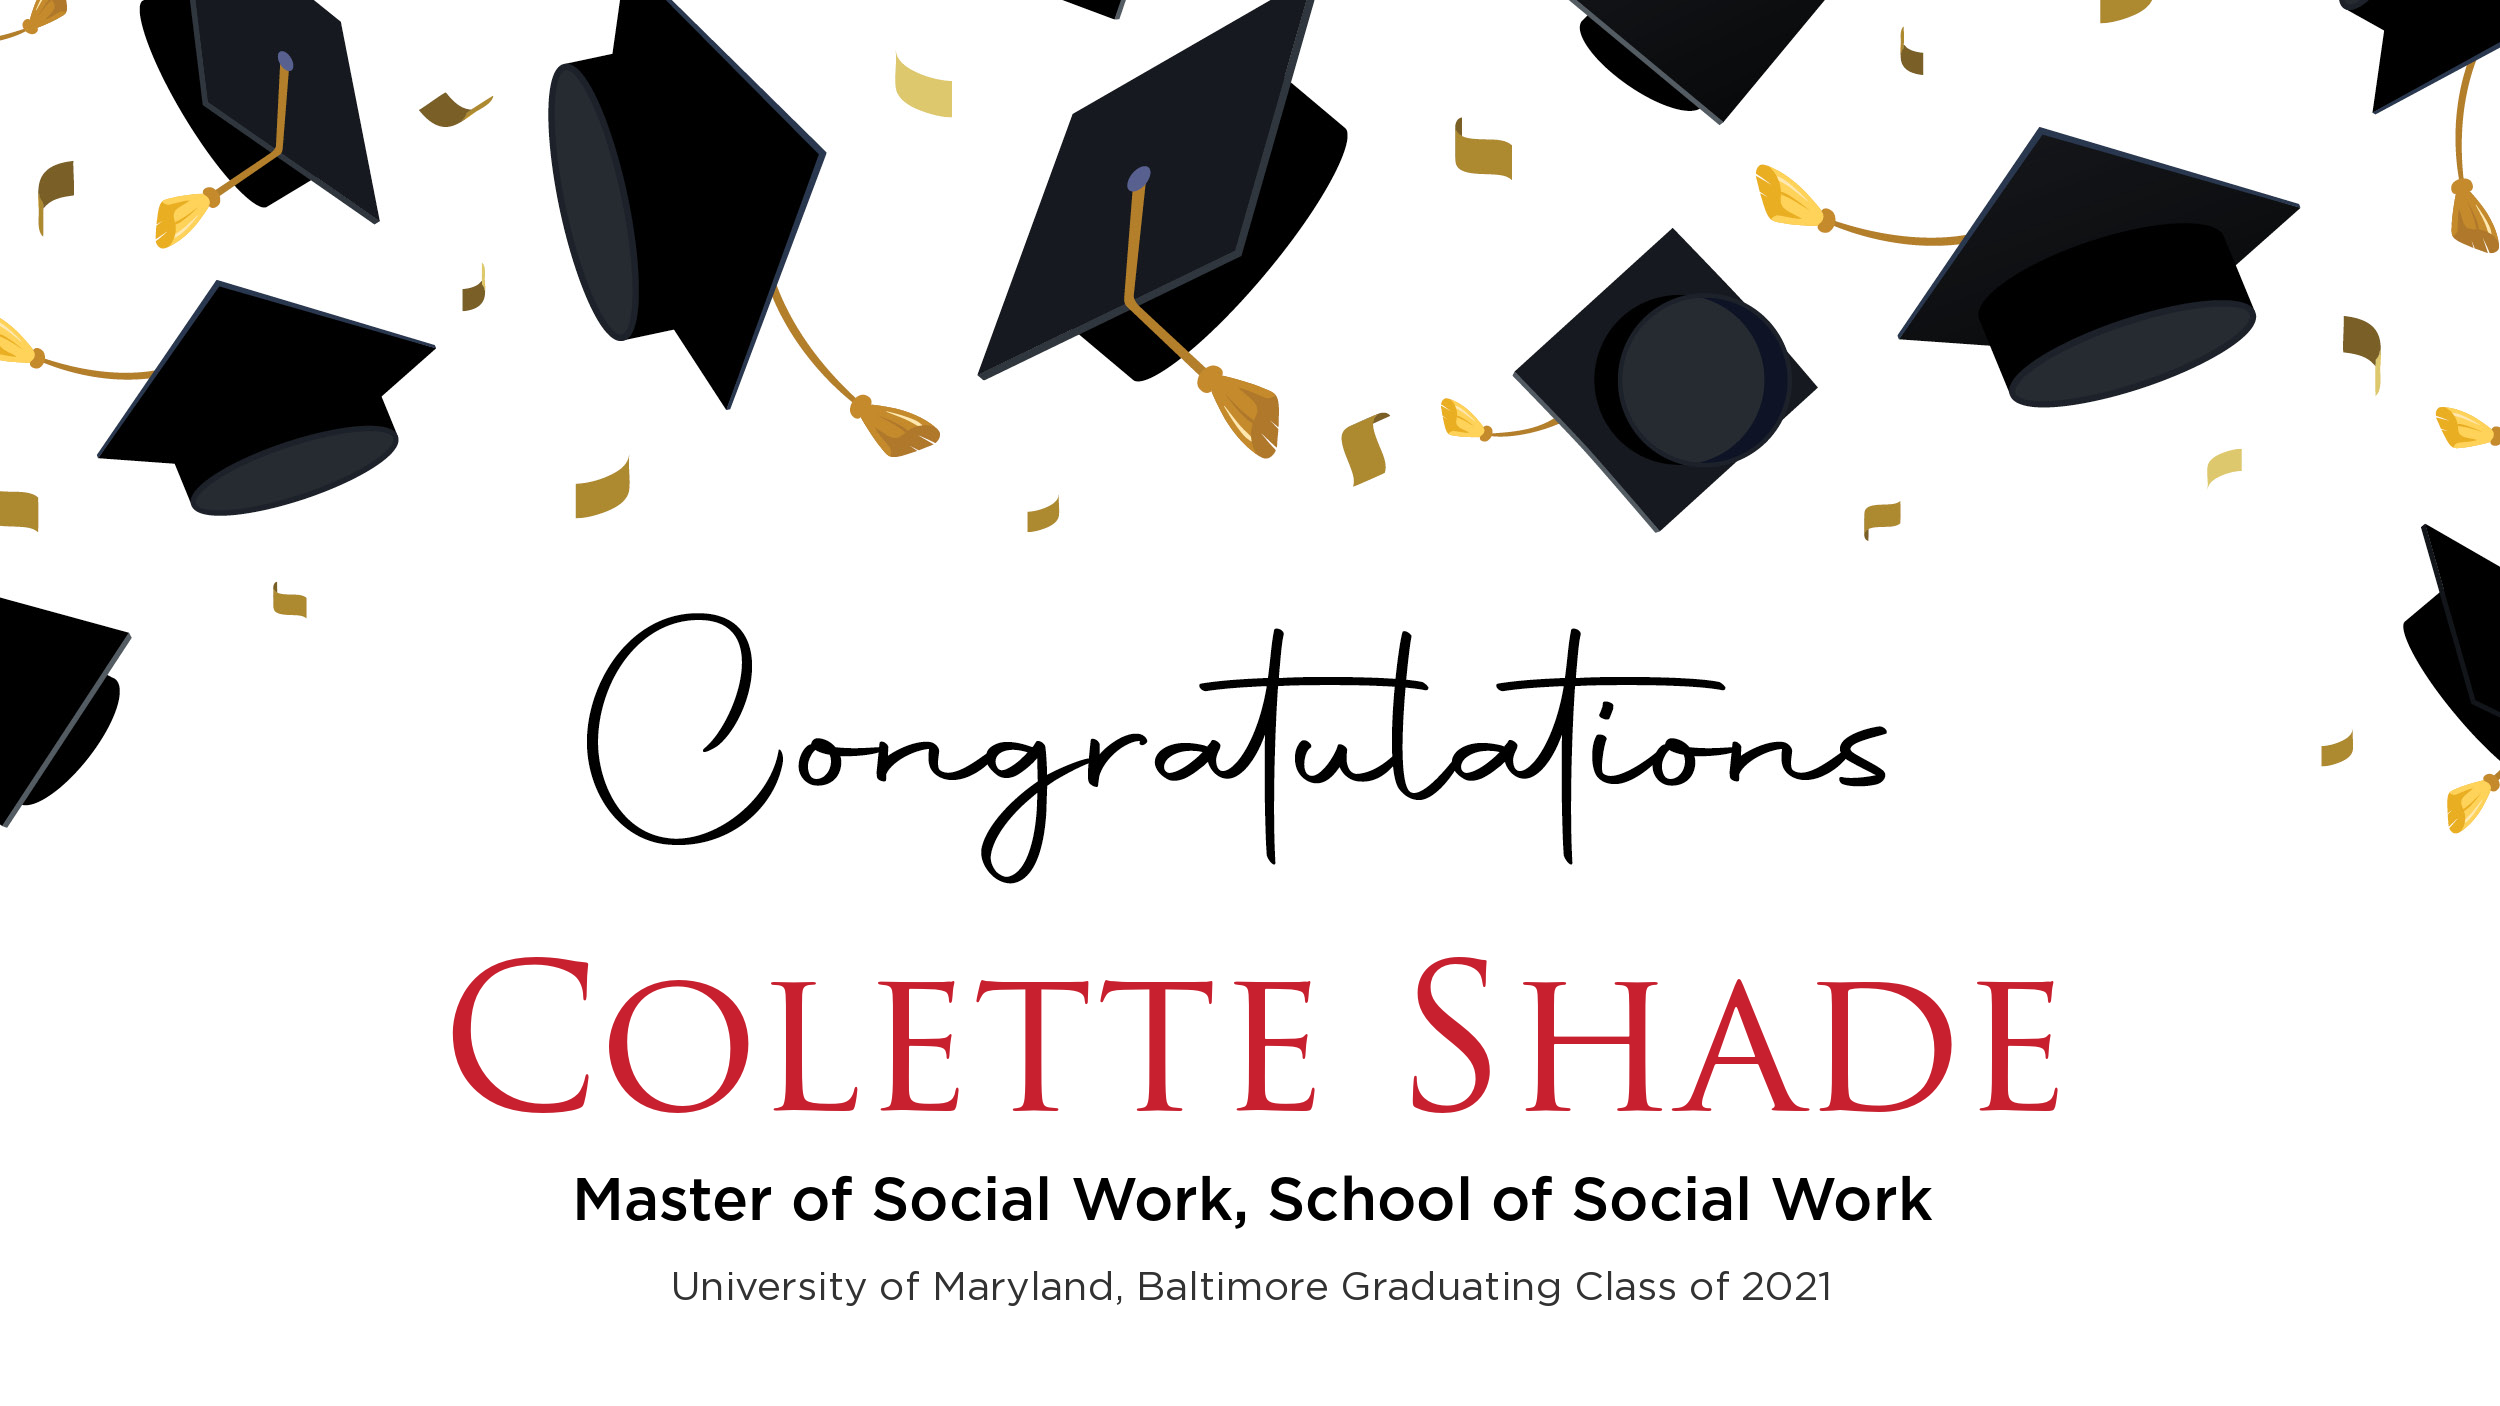 Congratulations Colette Shade, Master of Social Work